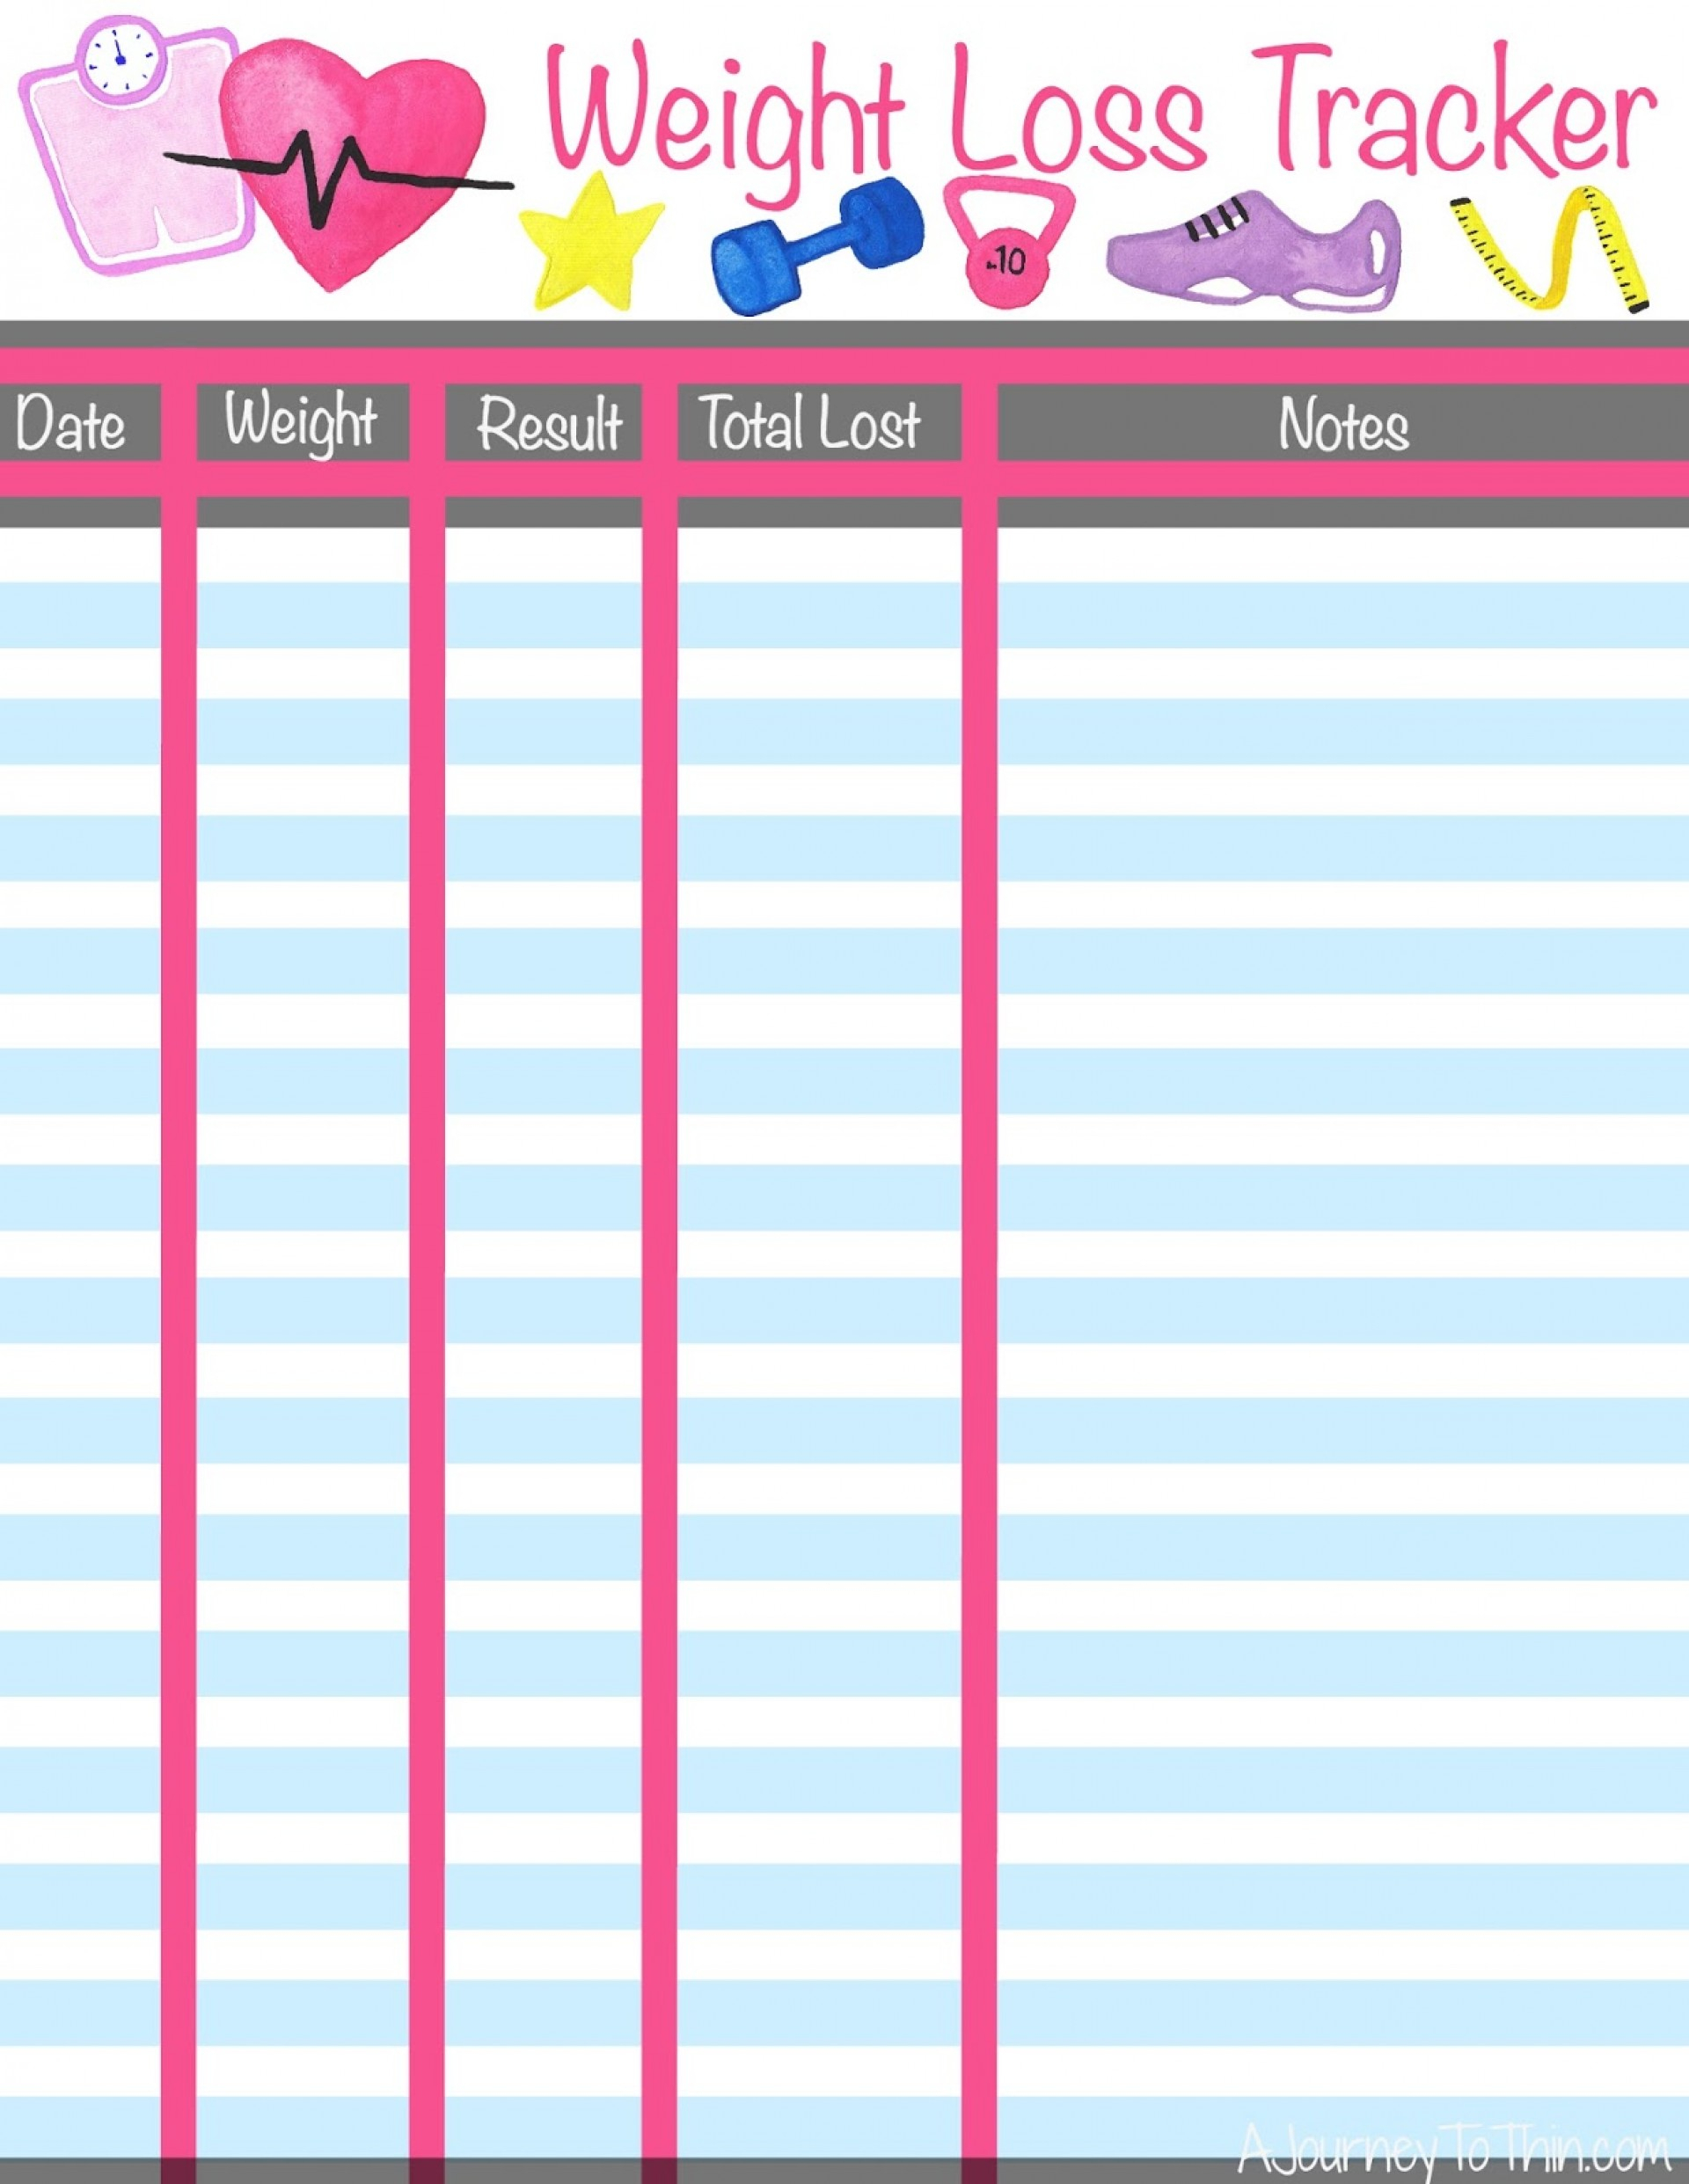 monthly weight loss tracker template 2020